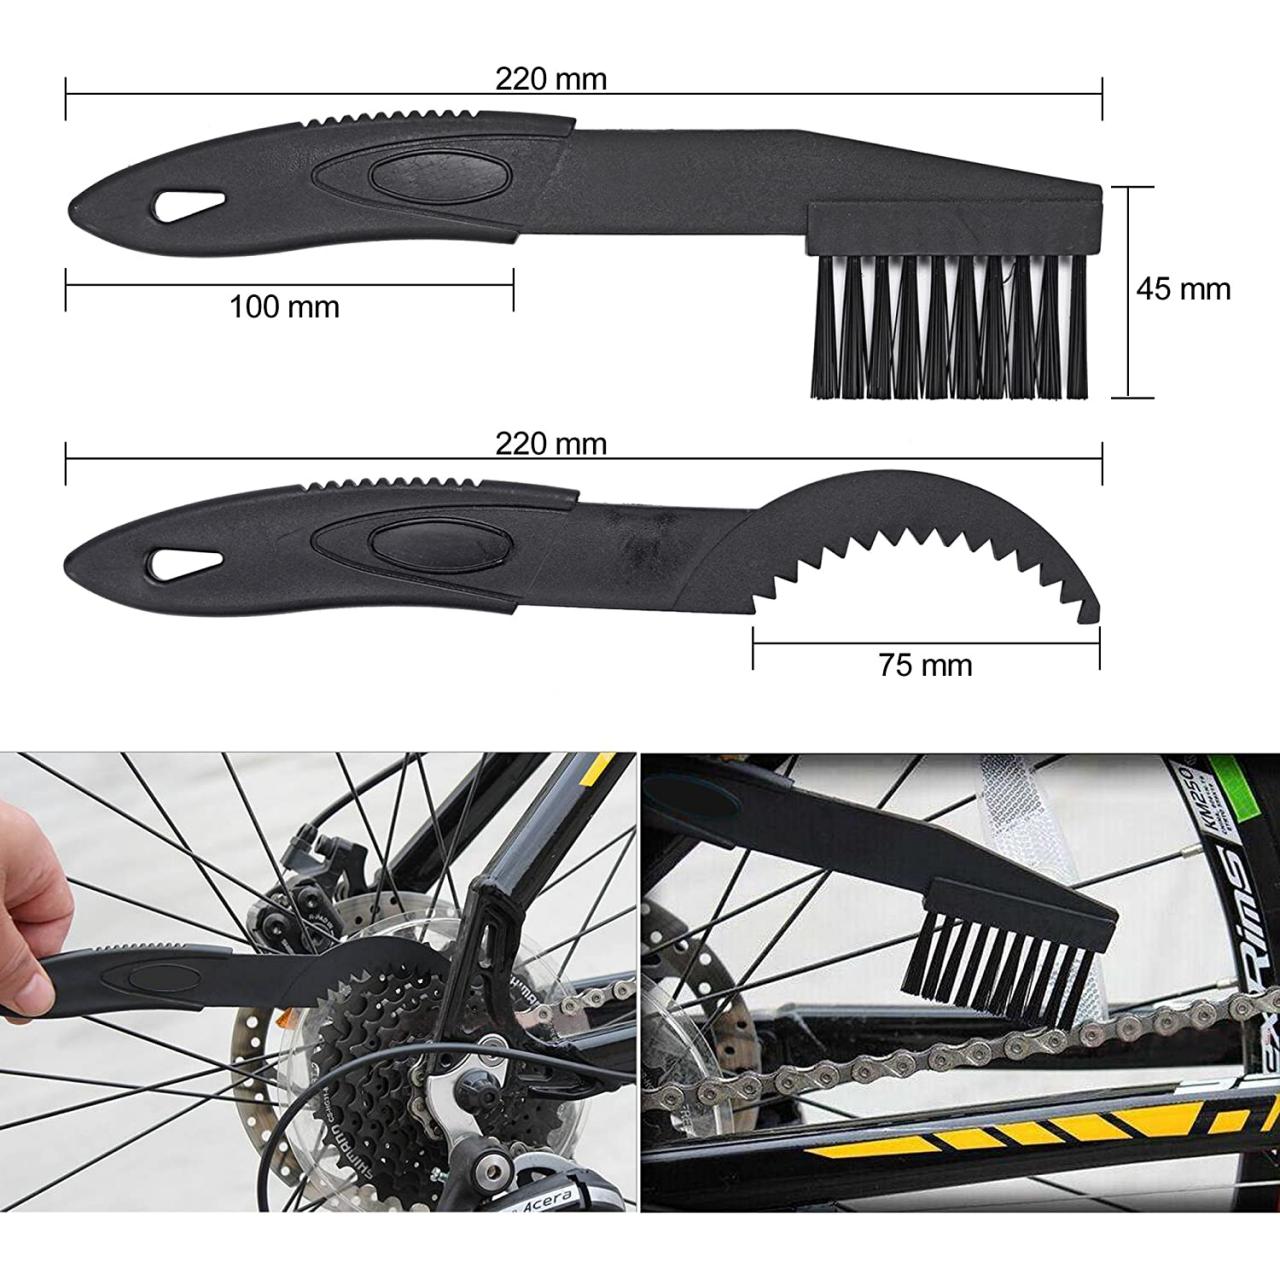 Oumers Bicycle Clean Brush Kit, 10pcs Motorcycle Bike Chain Cleaning Tools  Make Chain/Crank/Tire/Sprocket Cycling Corner Stain Dirt Clean,  Durable/Practical fit All Bike : Amazon.in: Car & Motorbike